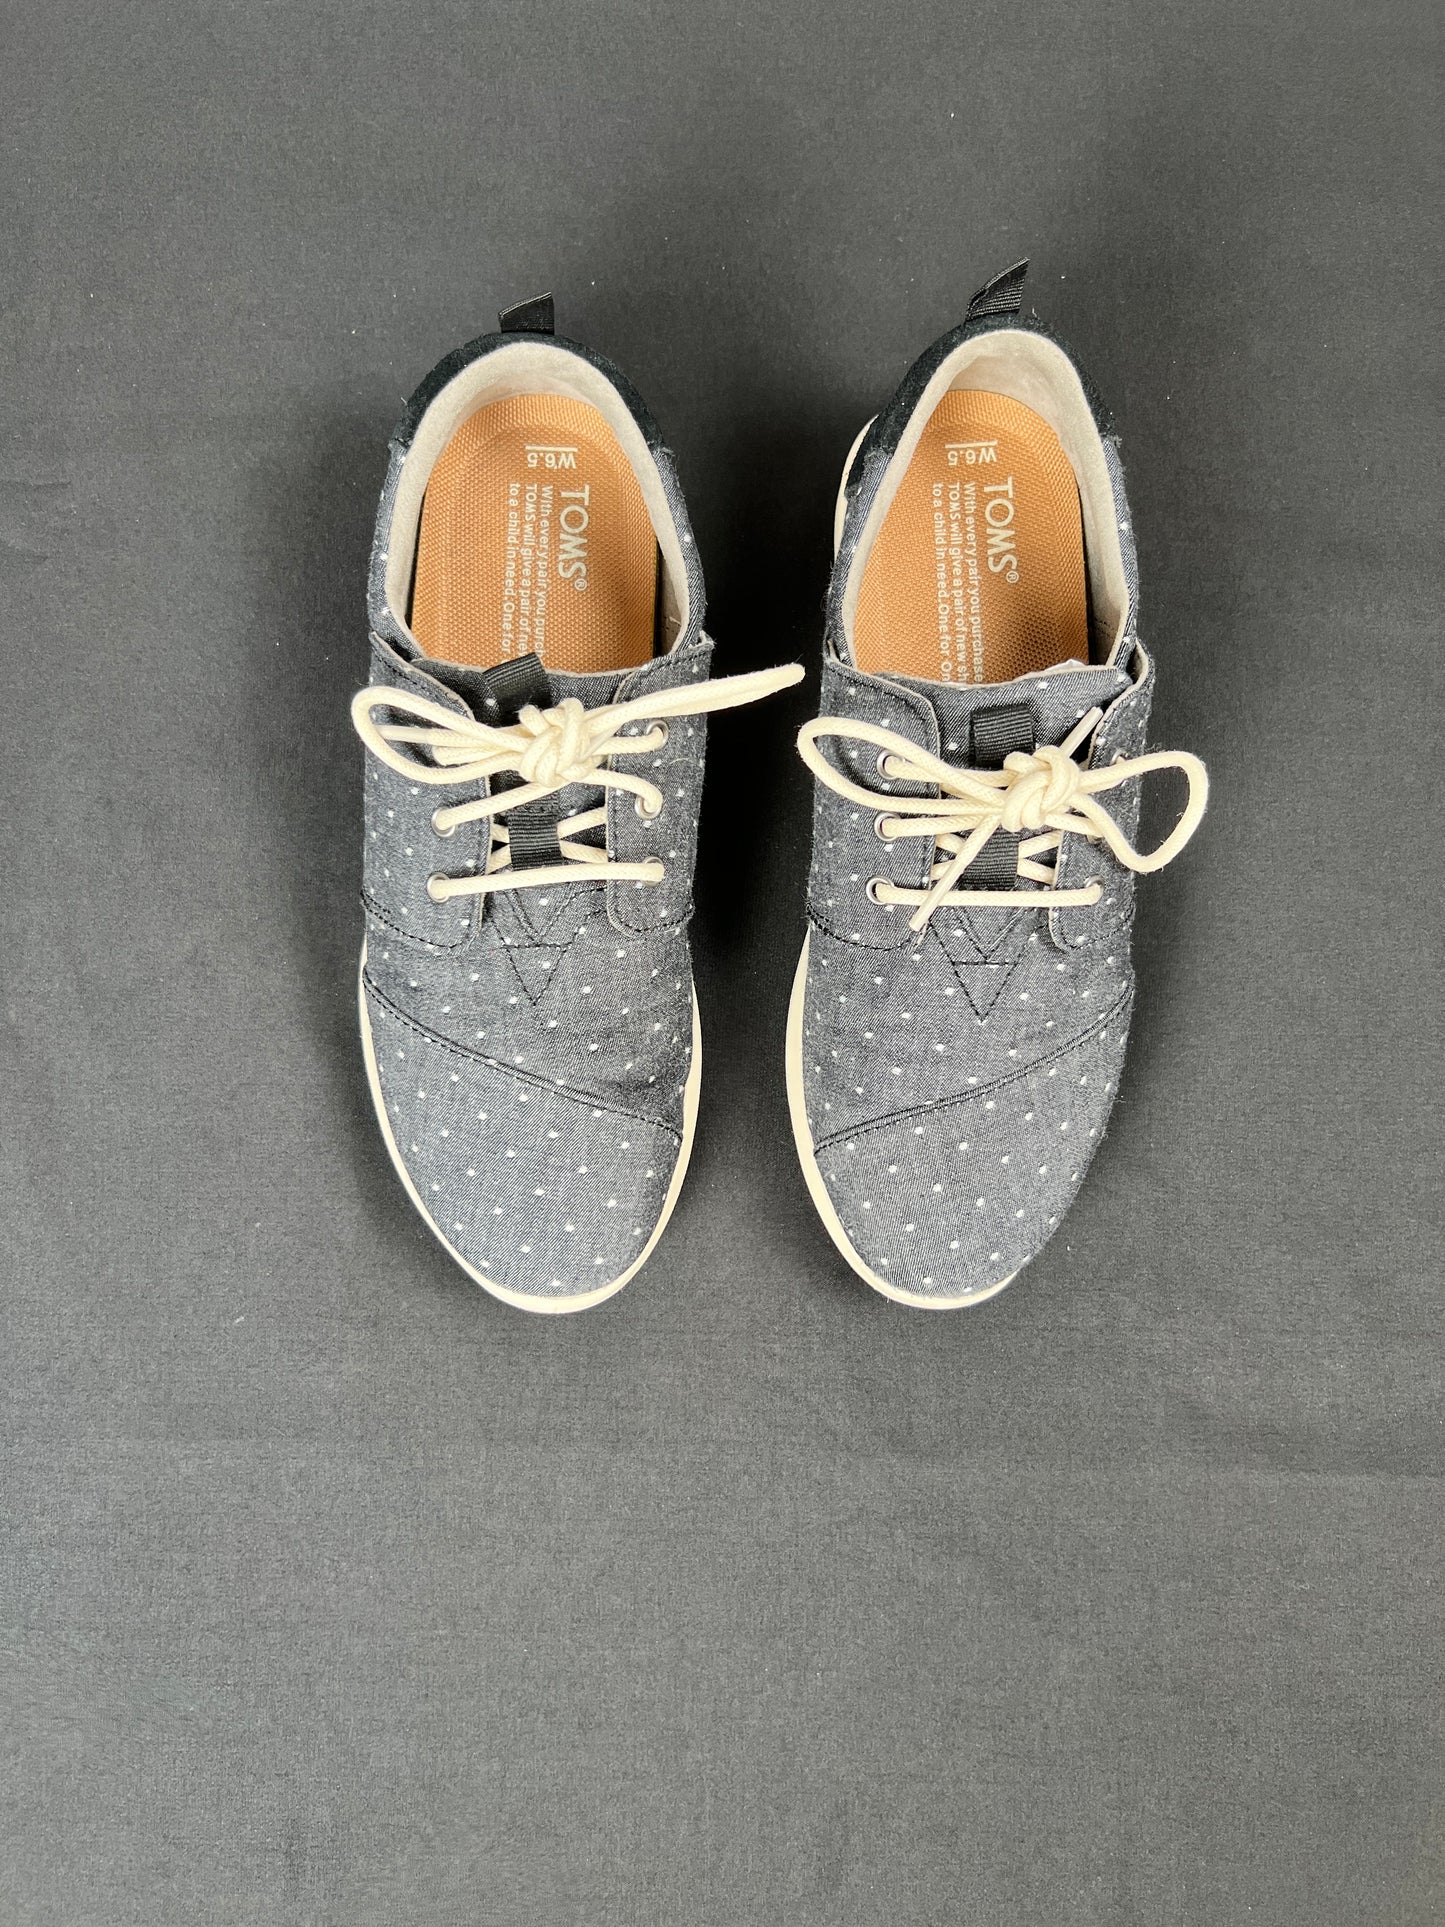 Shoes Flats Oxfords & Loafers By Toms  Size: 6.5